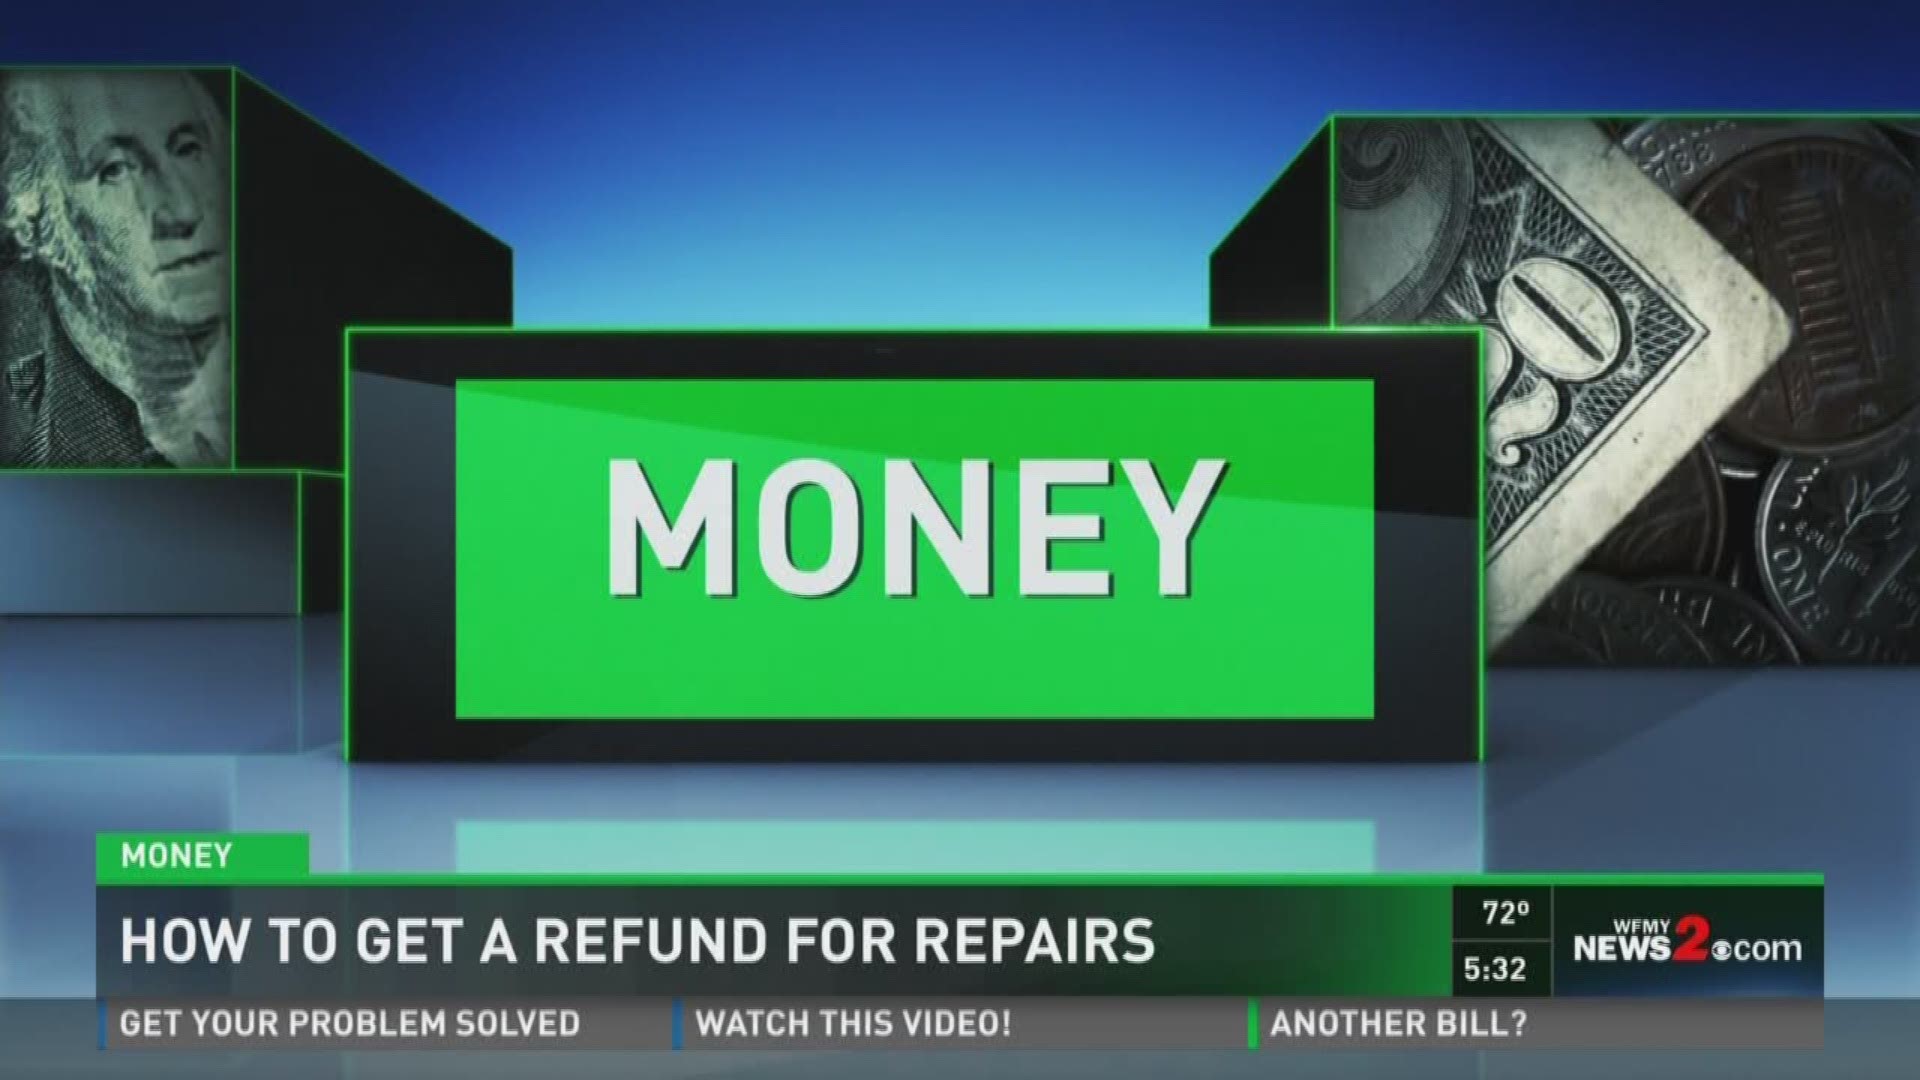 How To Get Refund For Repair That Doesn't Solve Problem